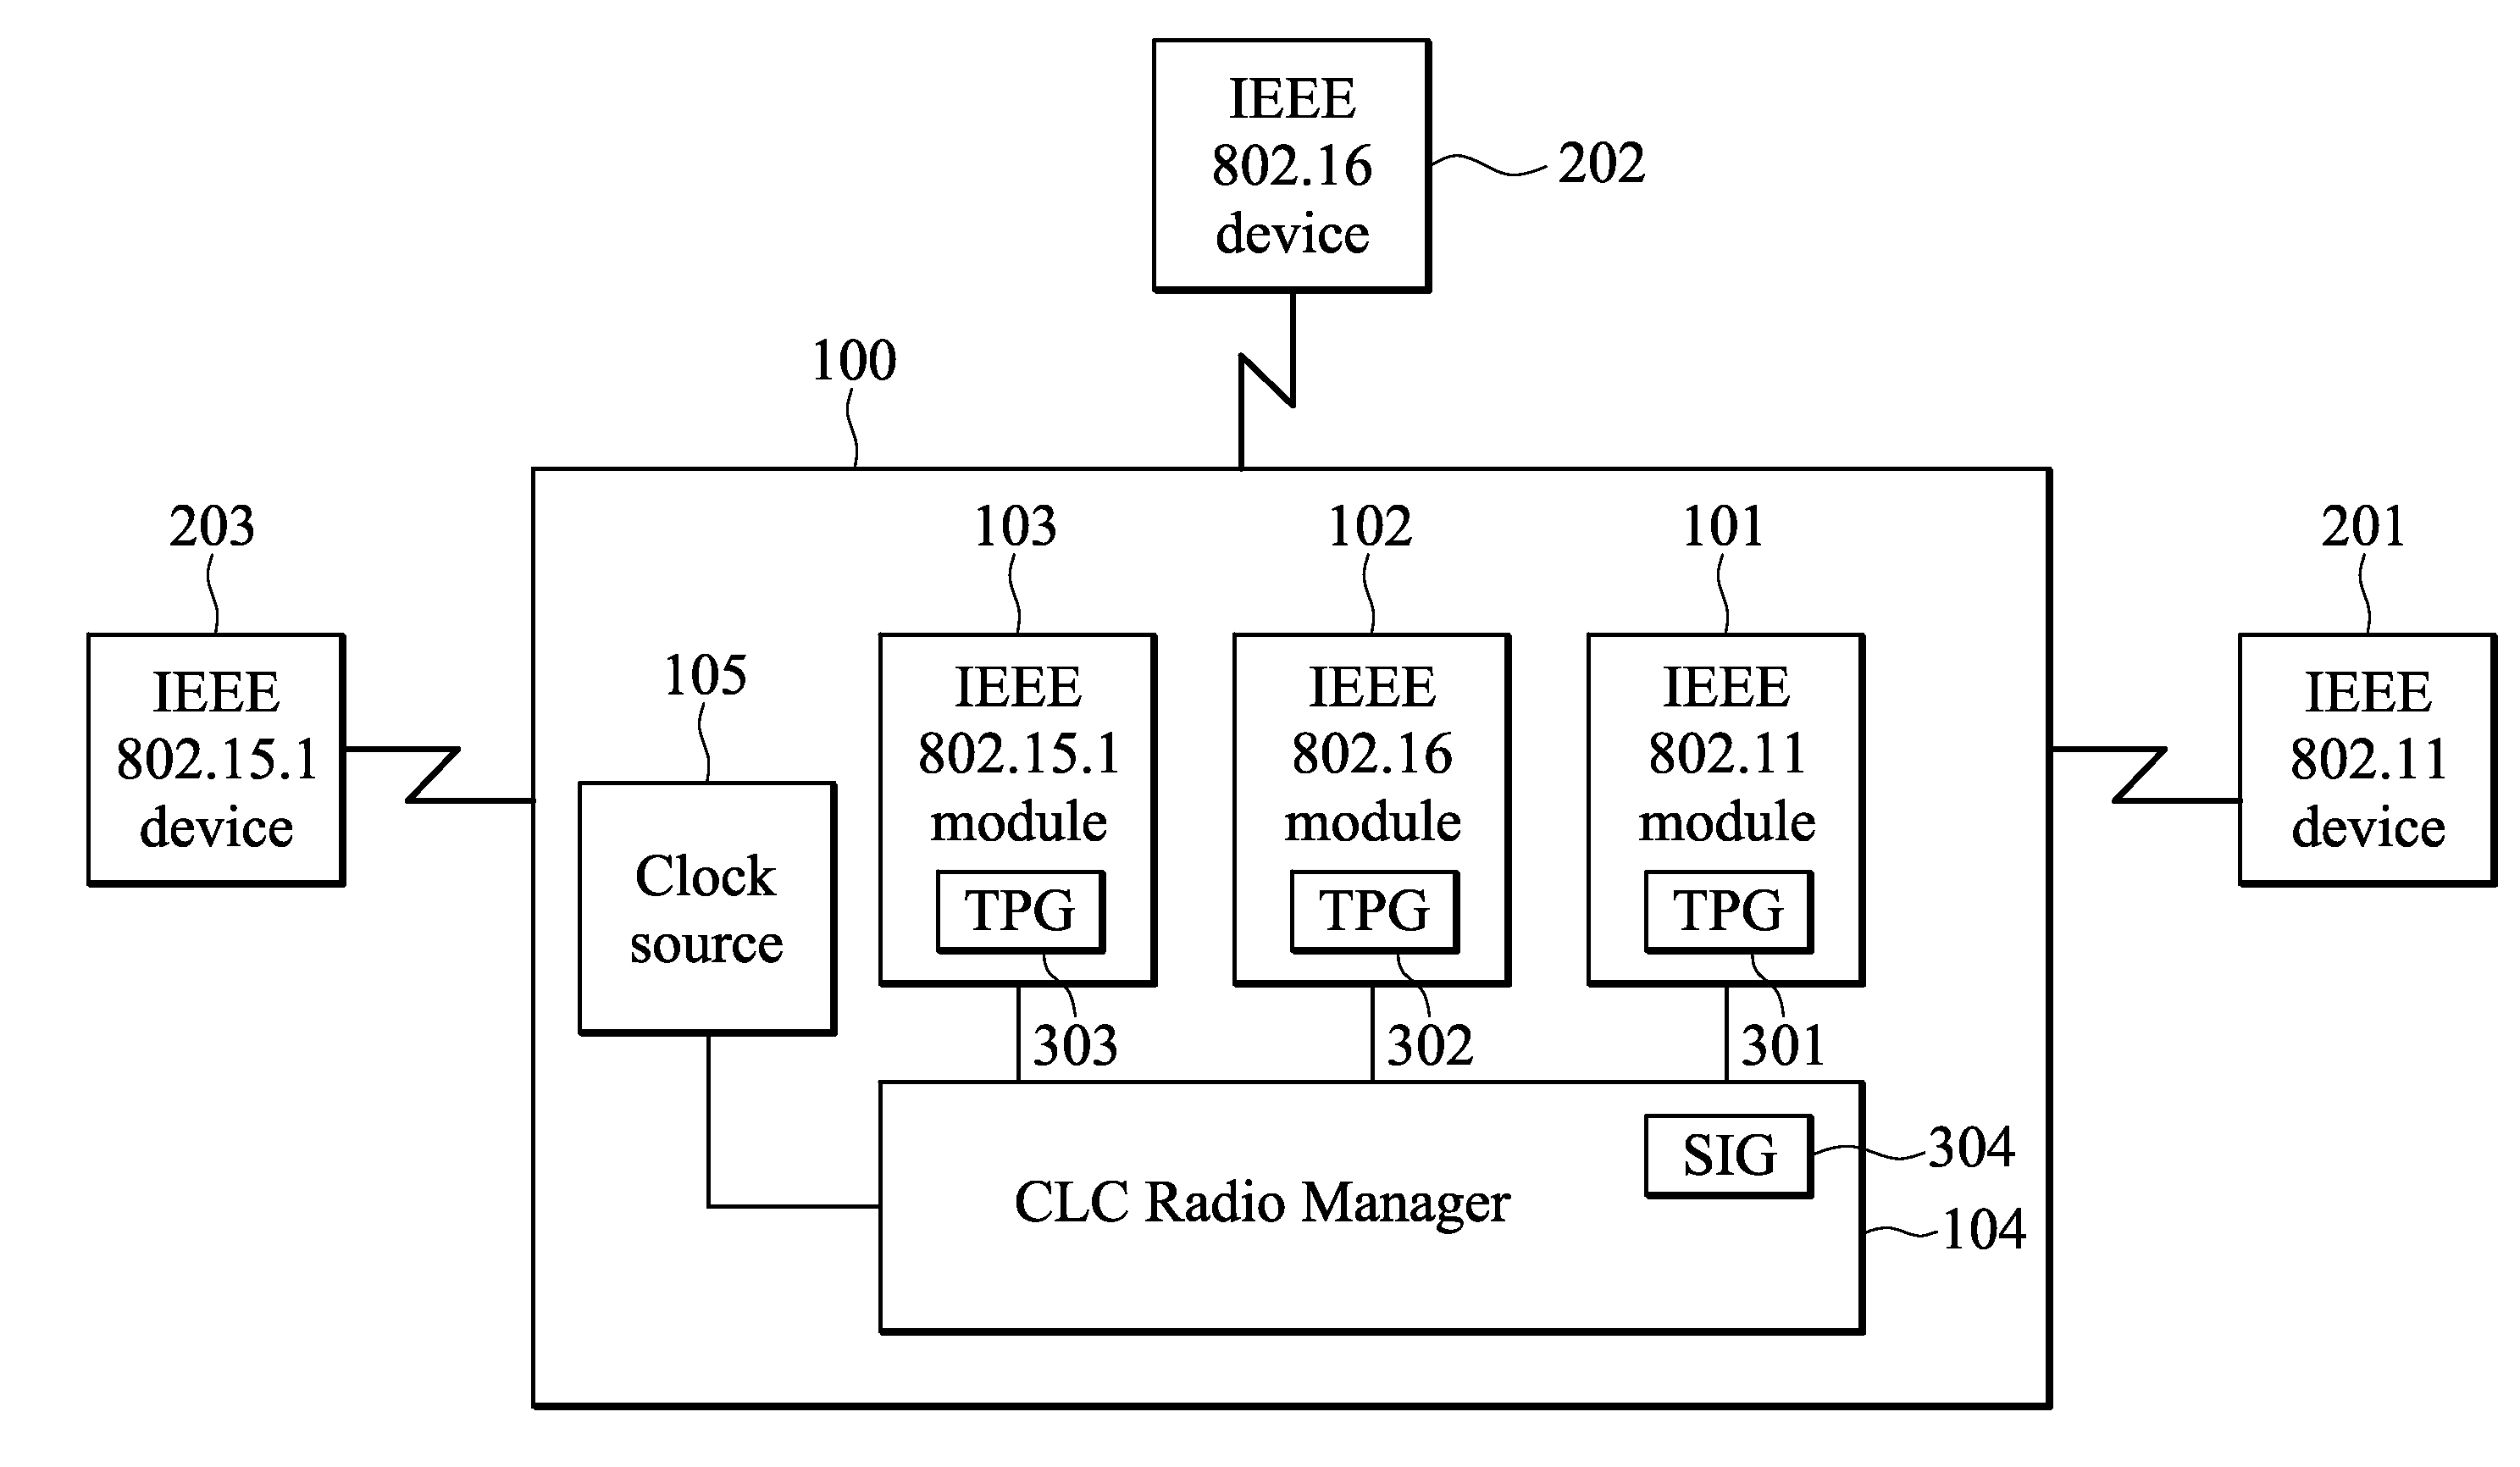 Synchronized activity bitmap generation method for co-located coexistence (CLC) devices